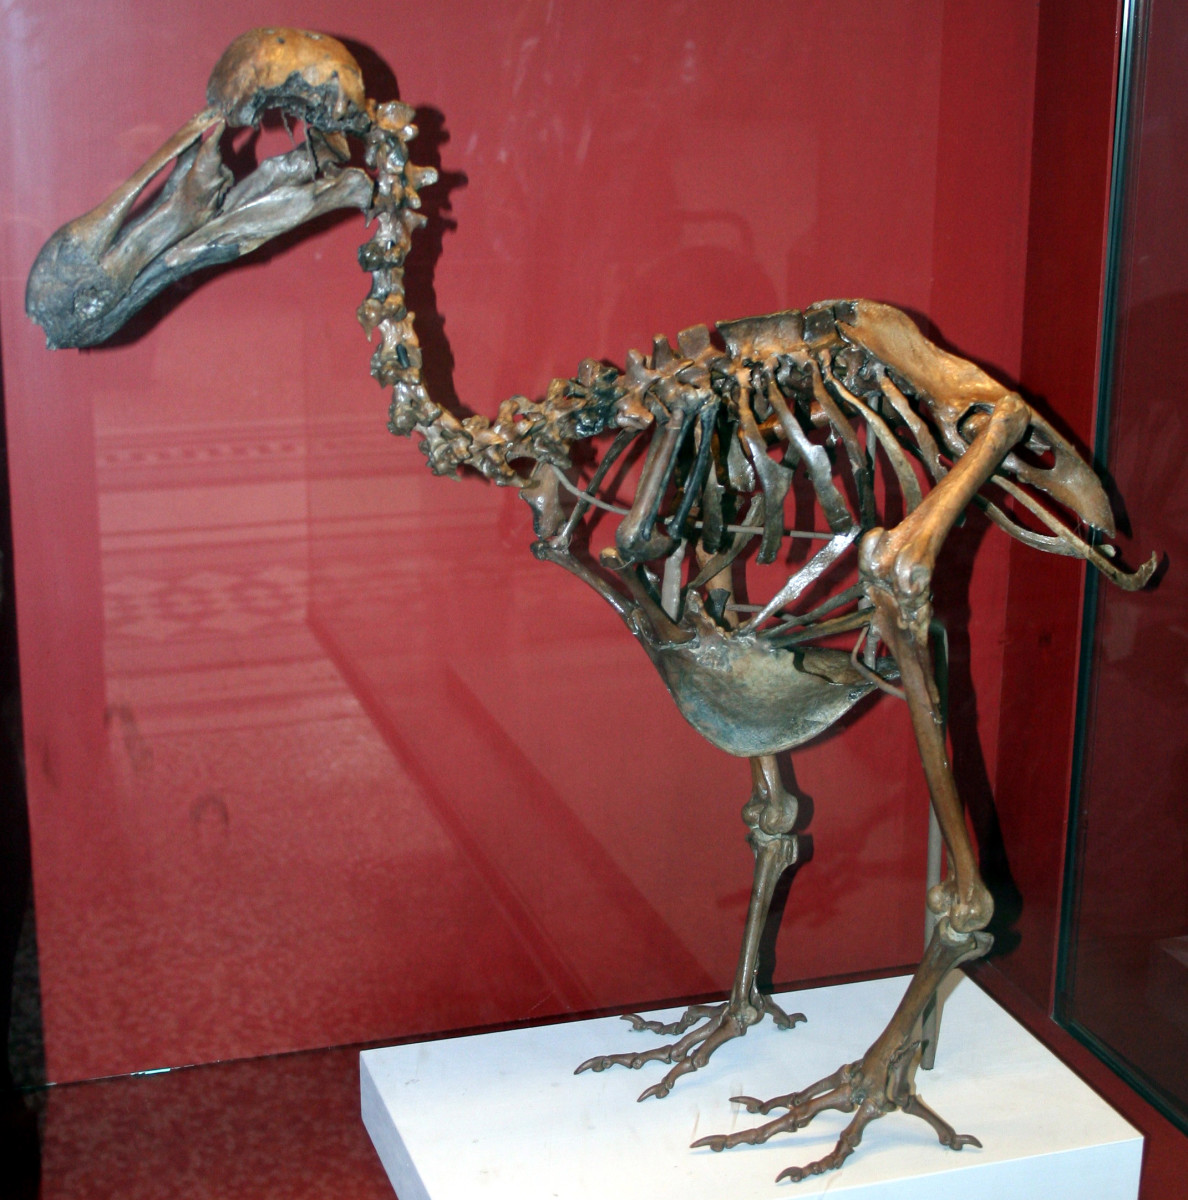 Dodo - Now, all we have our the dodo's fossils. 